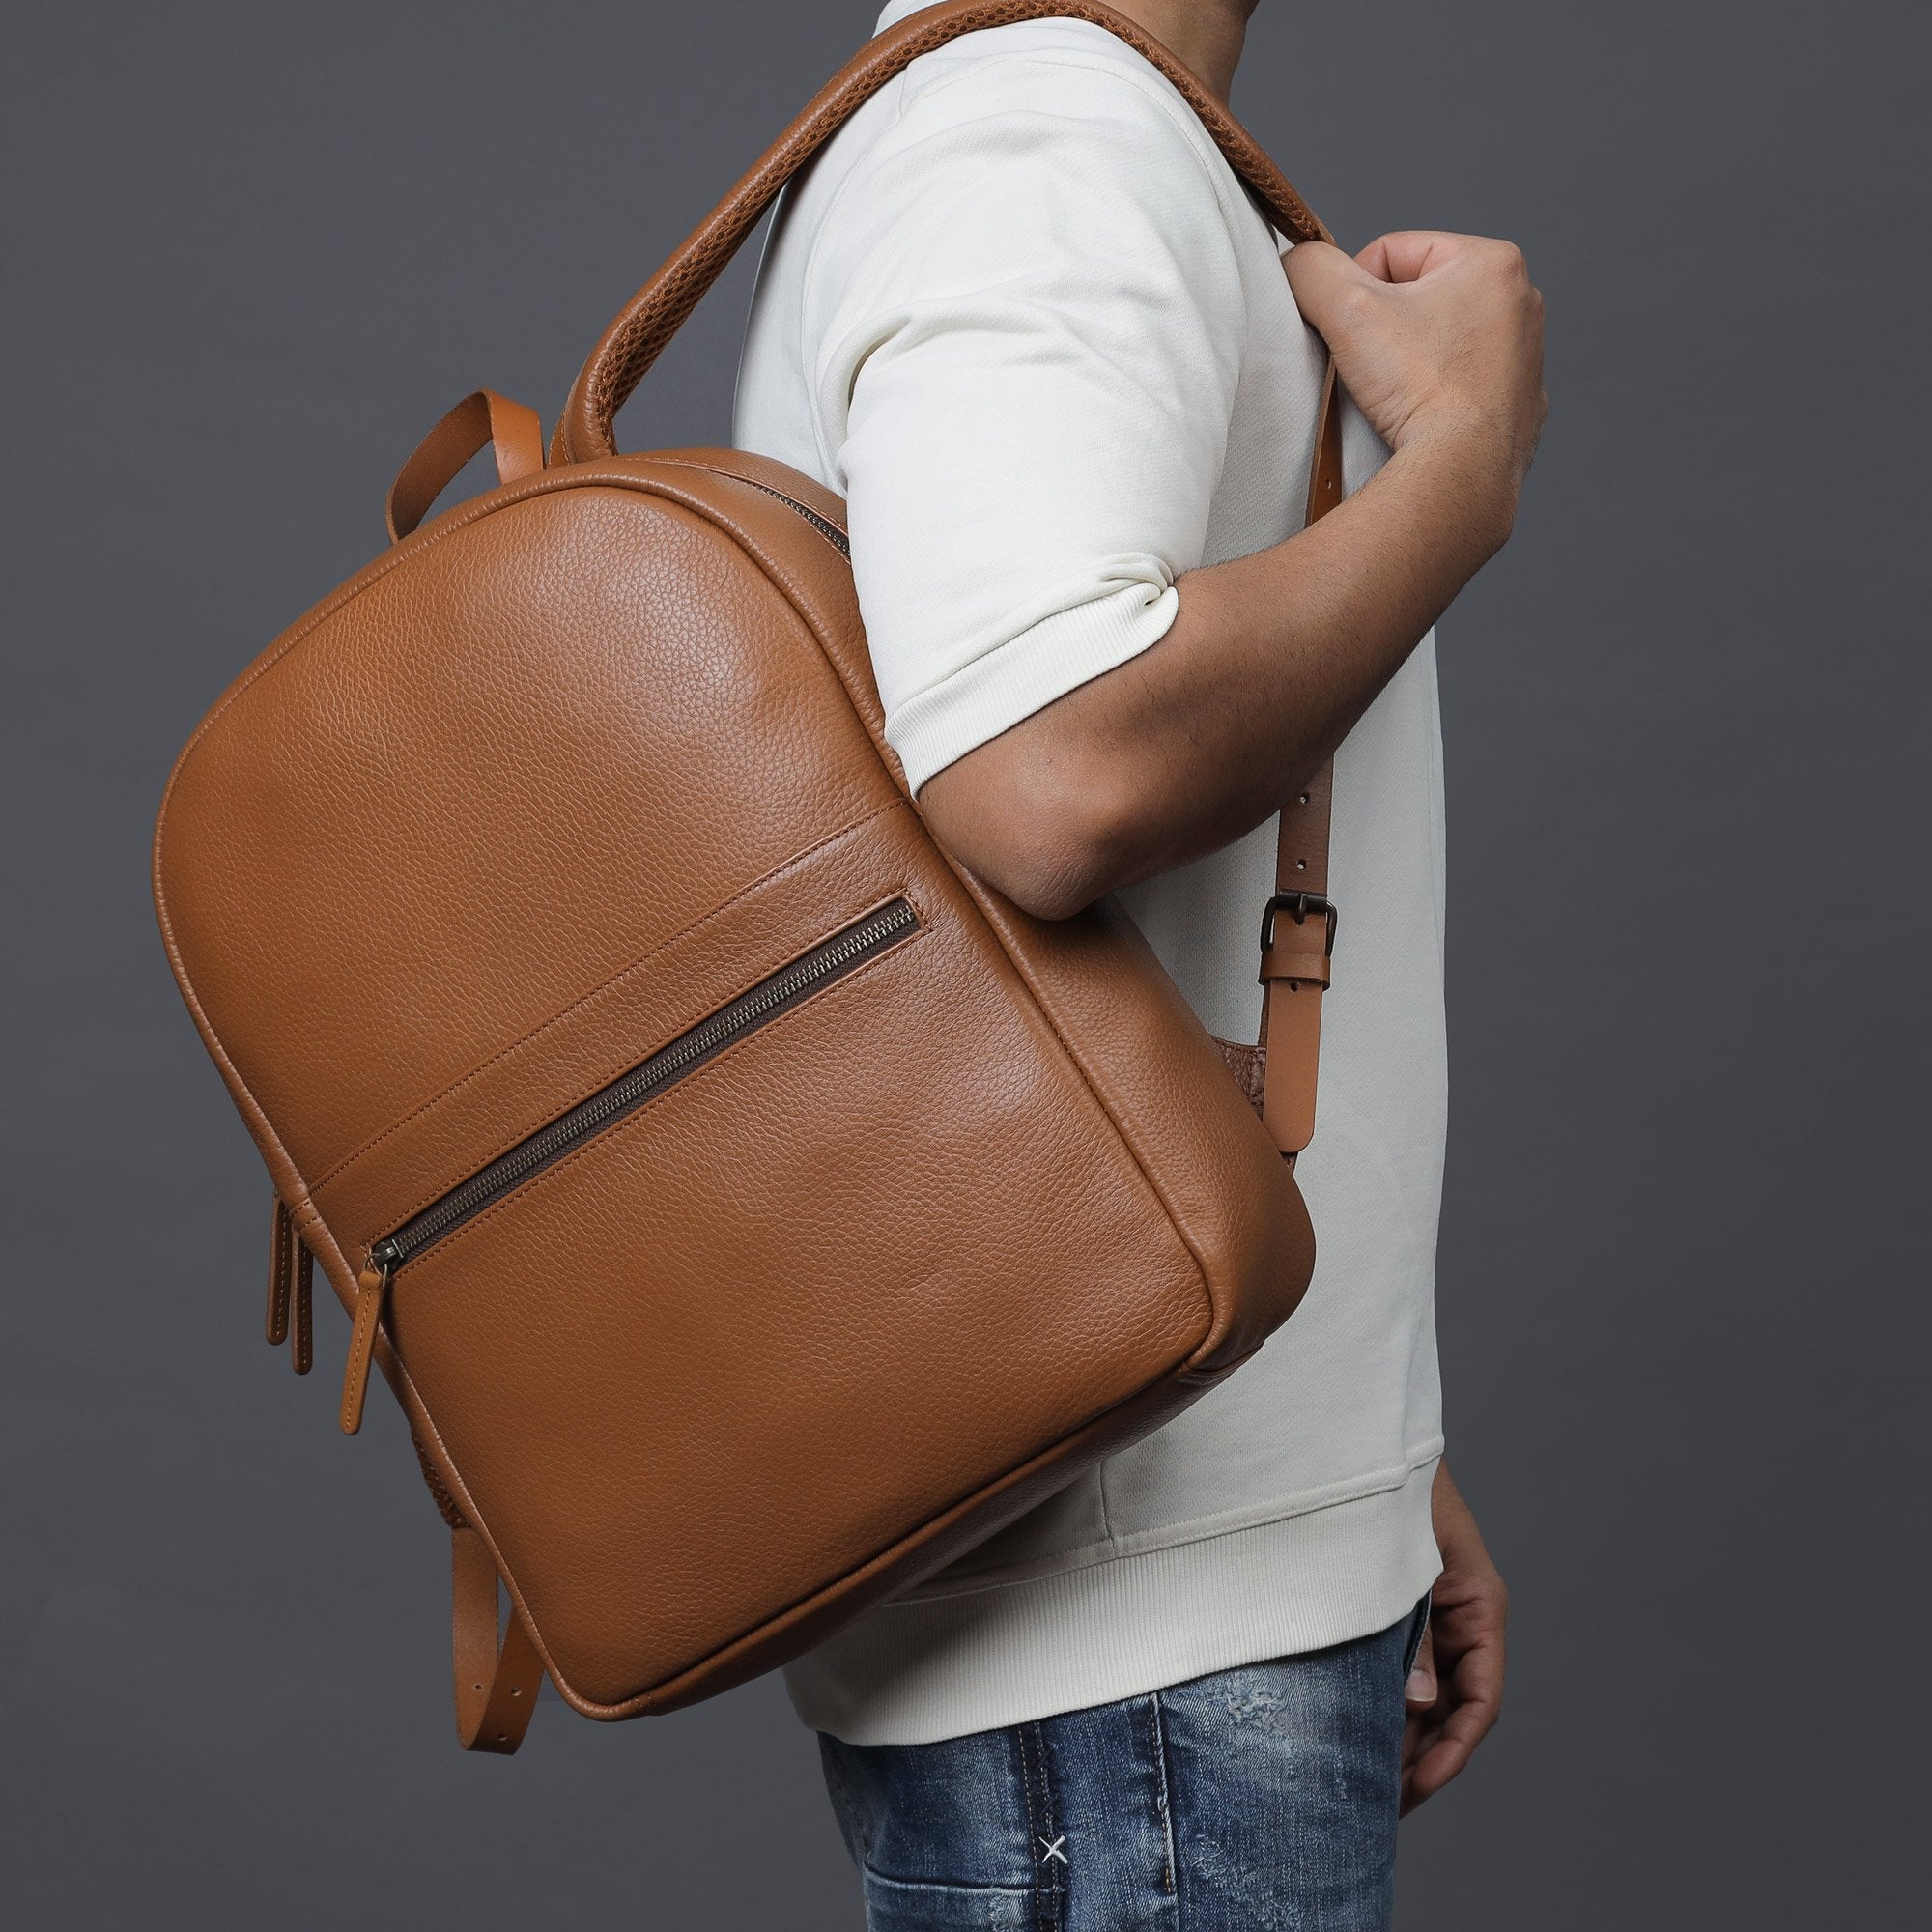 Tan leather Travel backpack